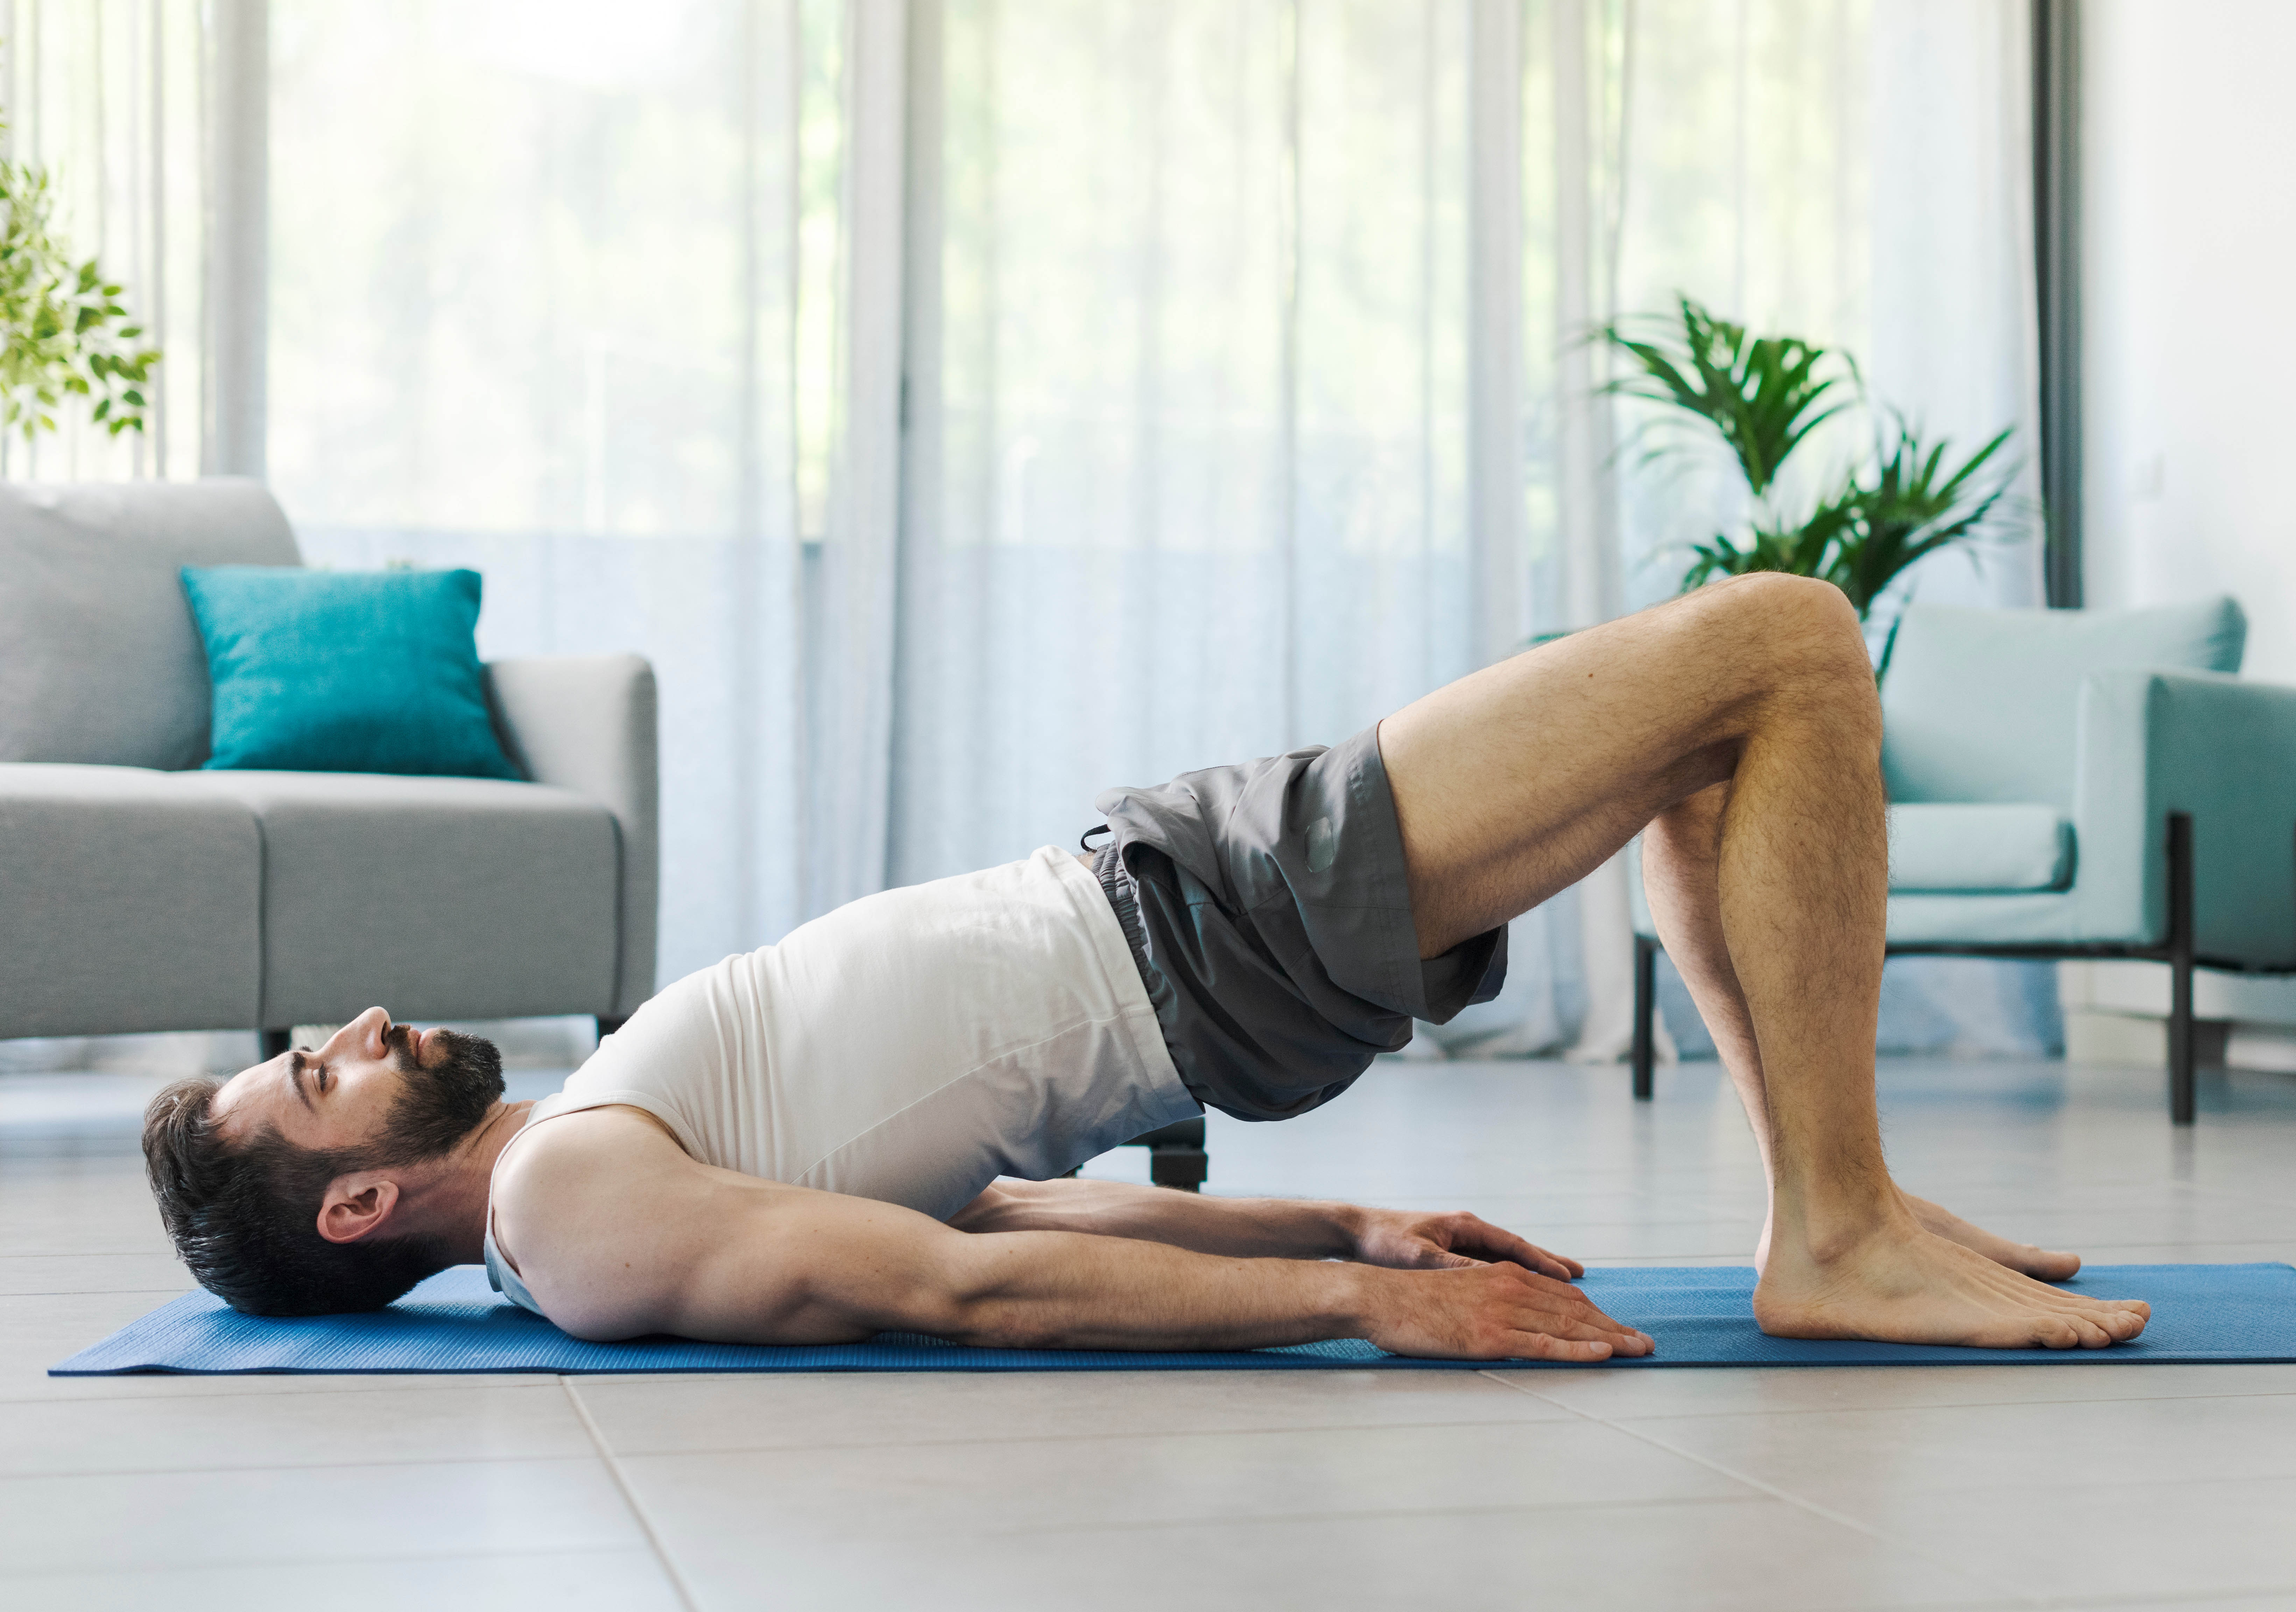 Athletic man in a bridge pose on a yoga mat in his living room; couch, chair, and plants in the background